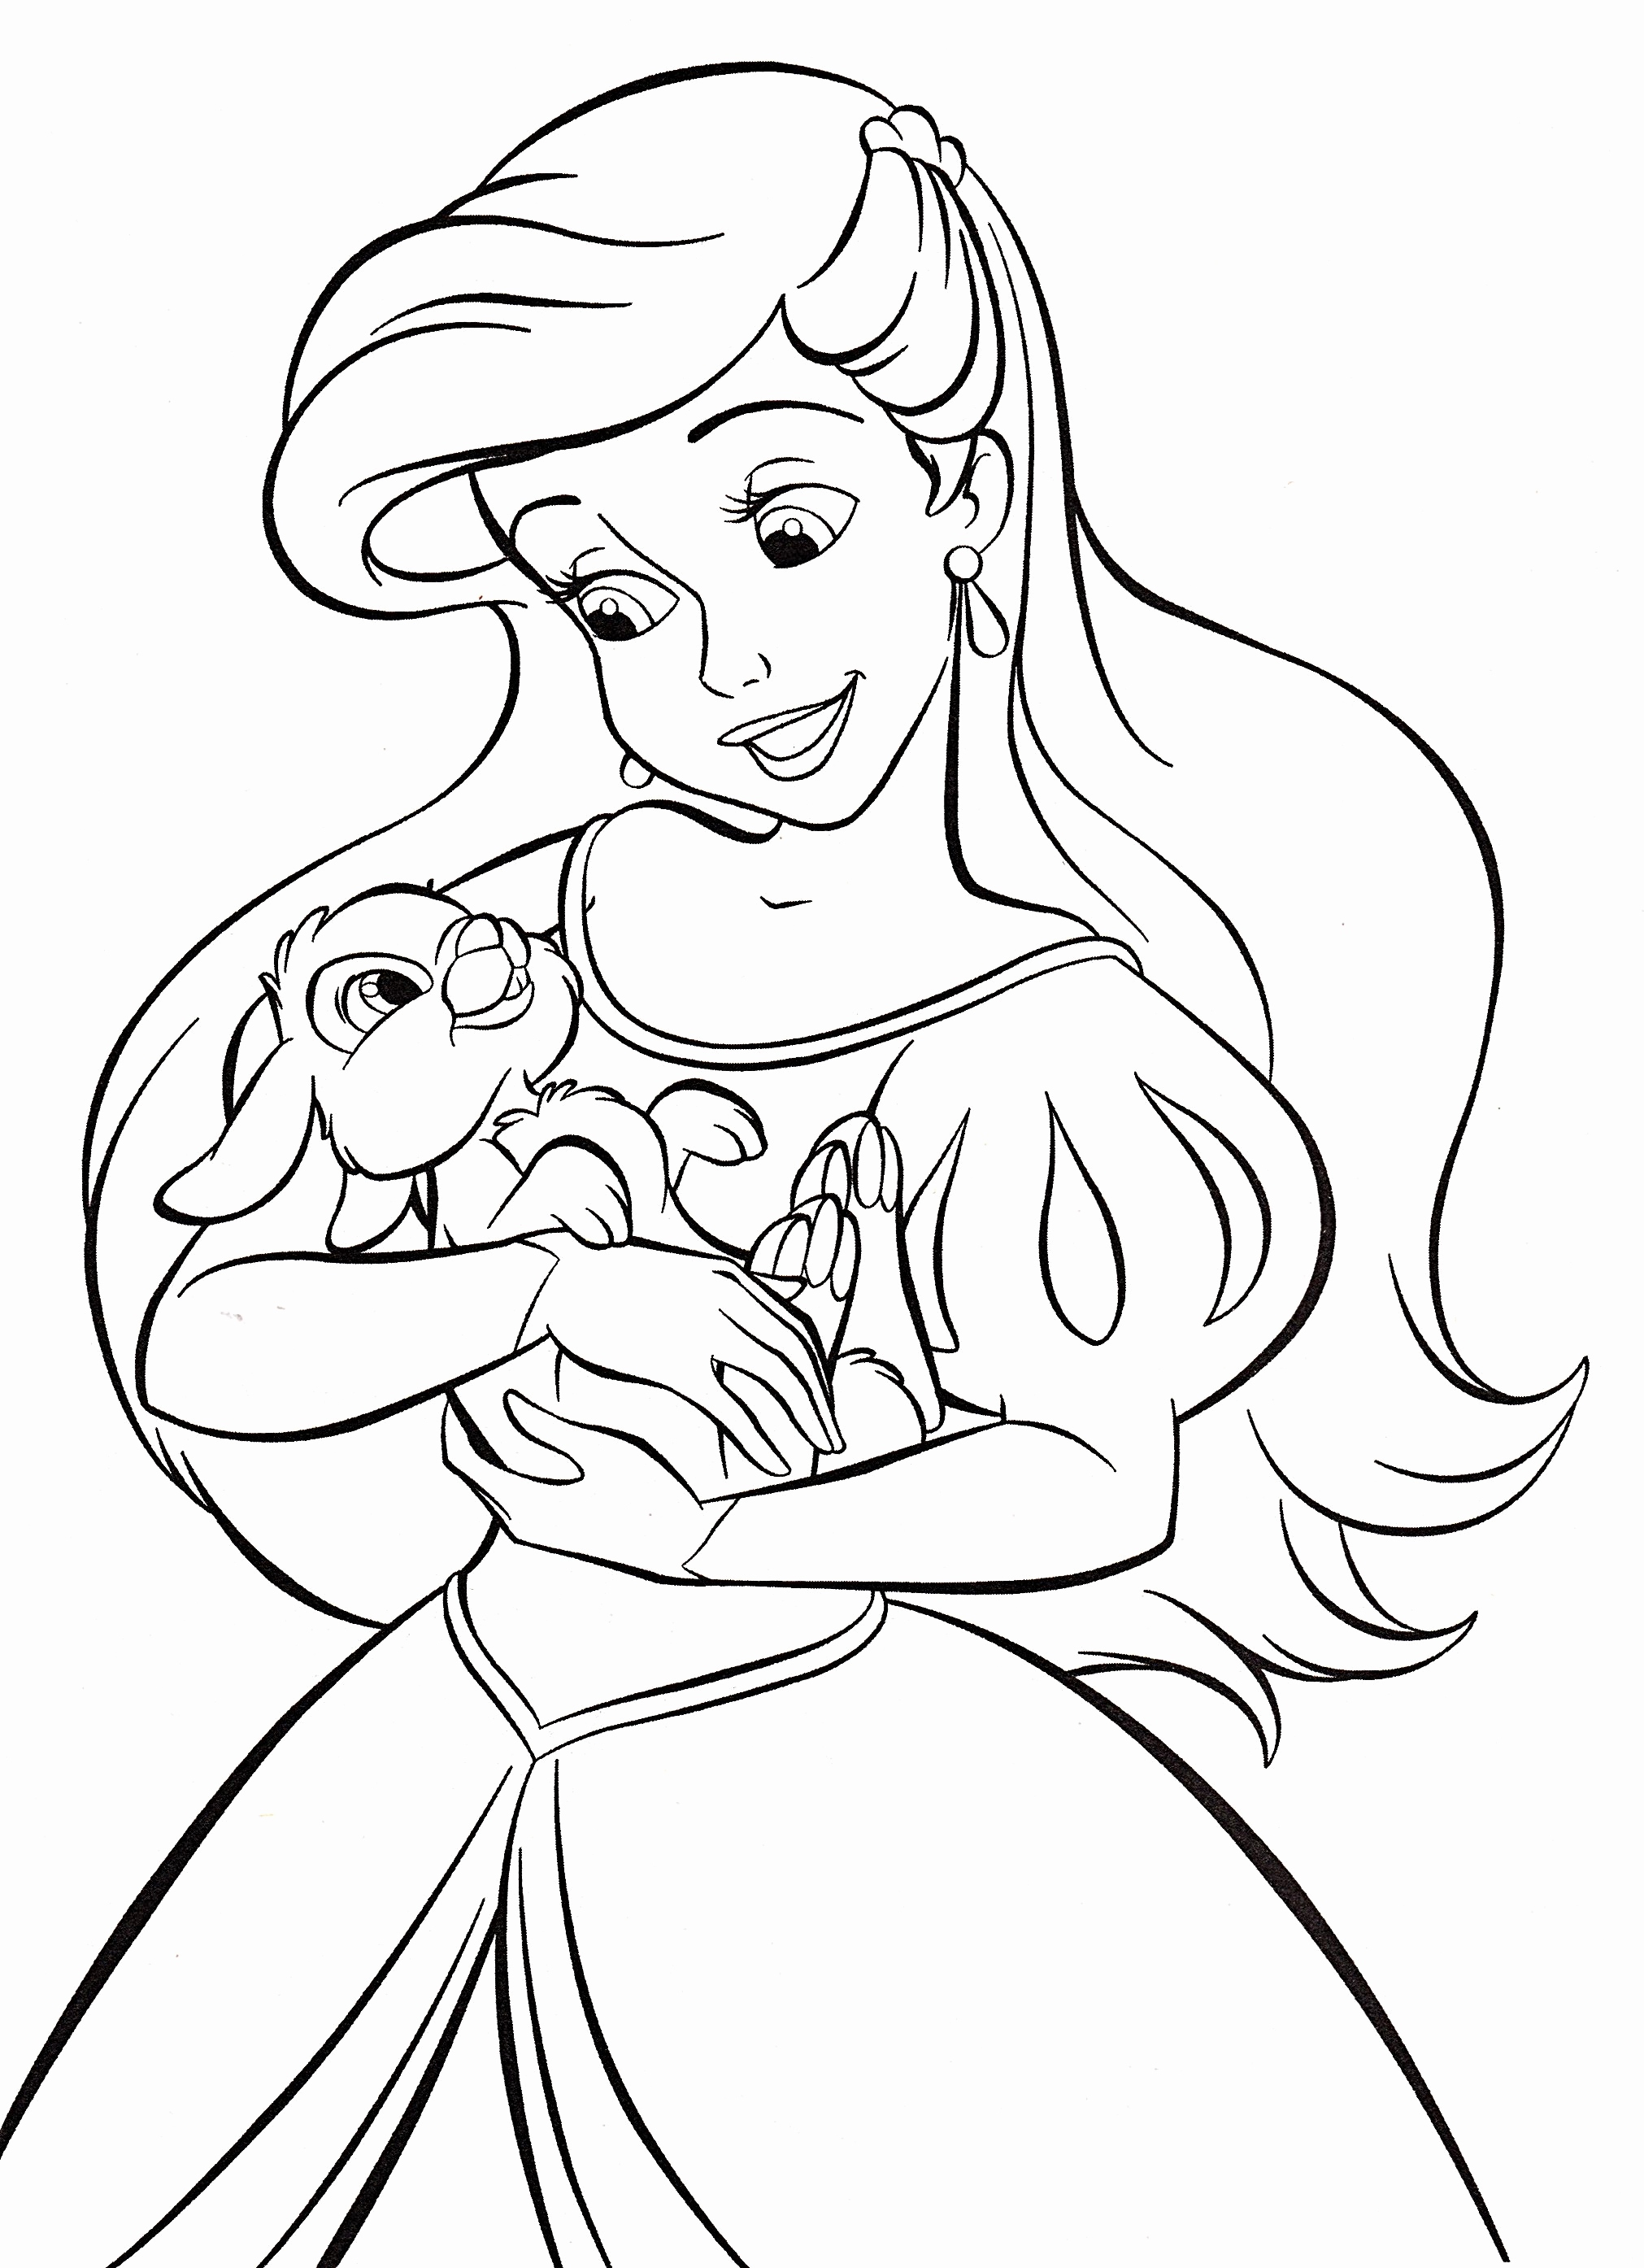 Ariel Christmas Coloring Pages at GetColorings.com | Free ...